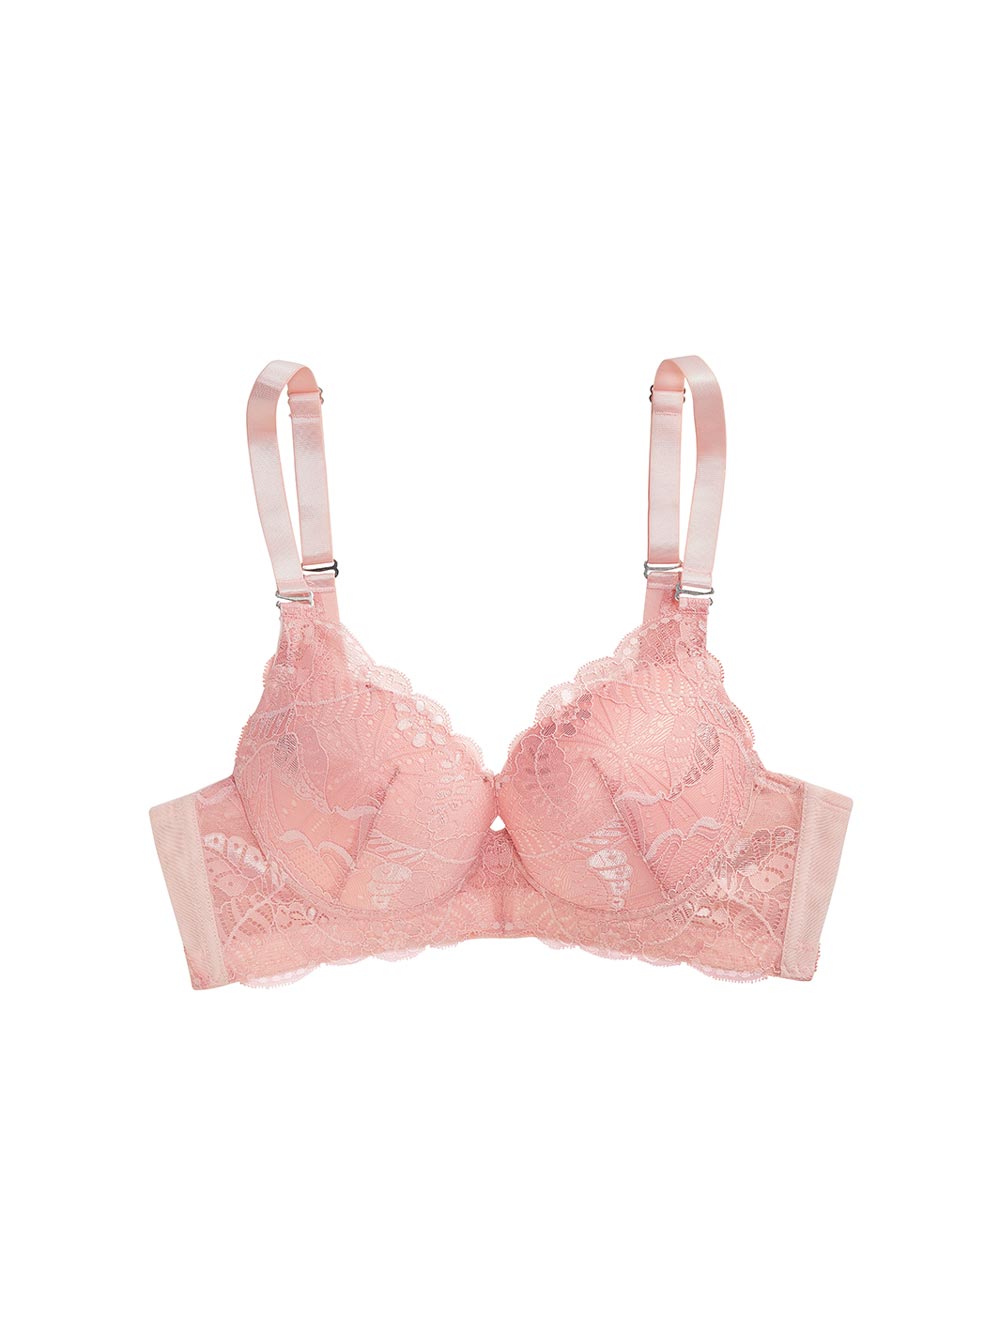 Rell Contoured Push-Up Lace Bra